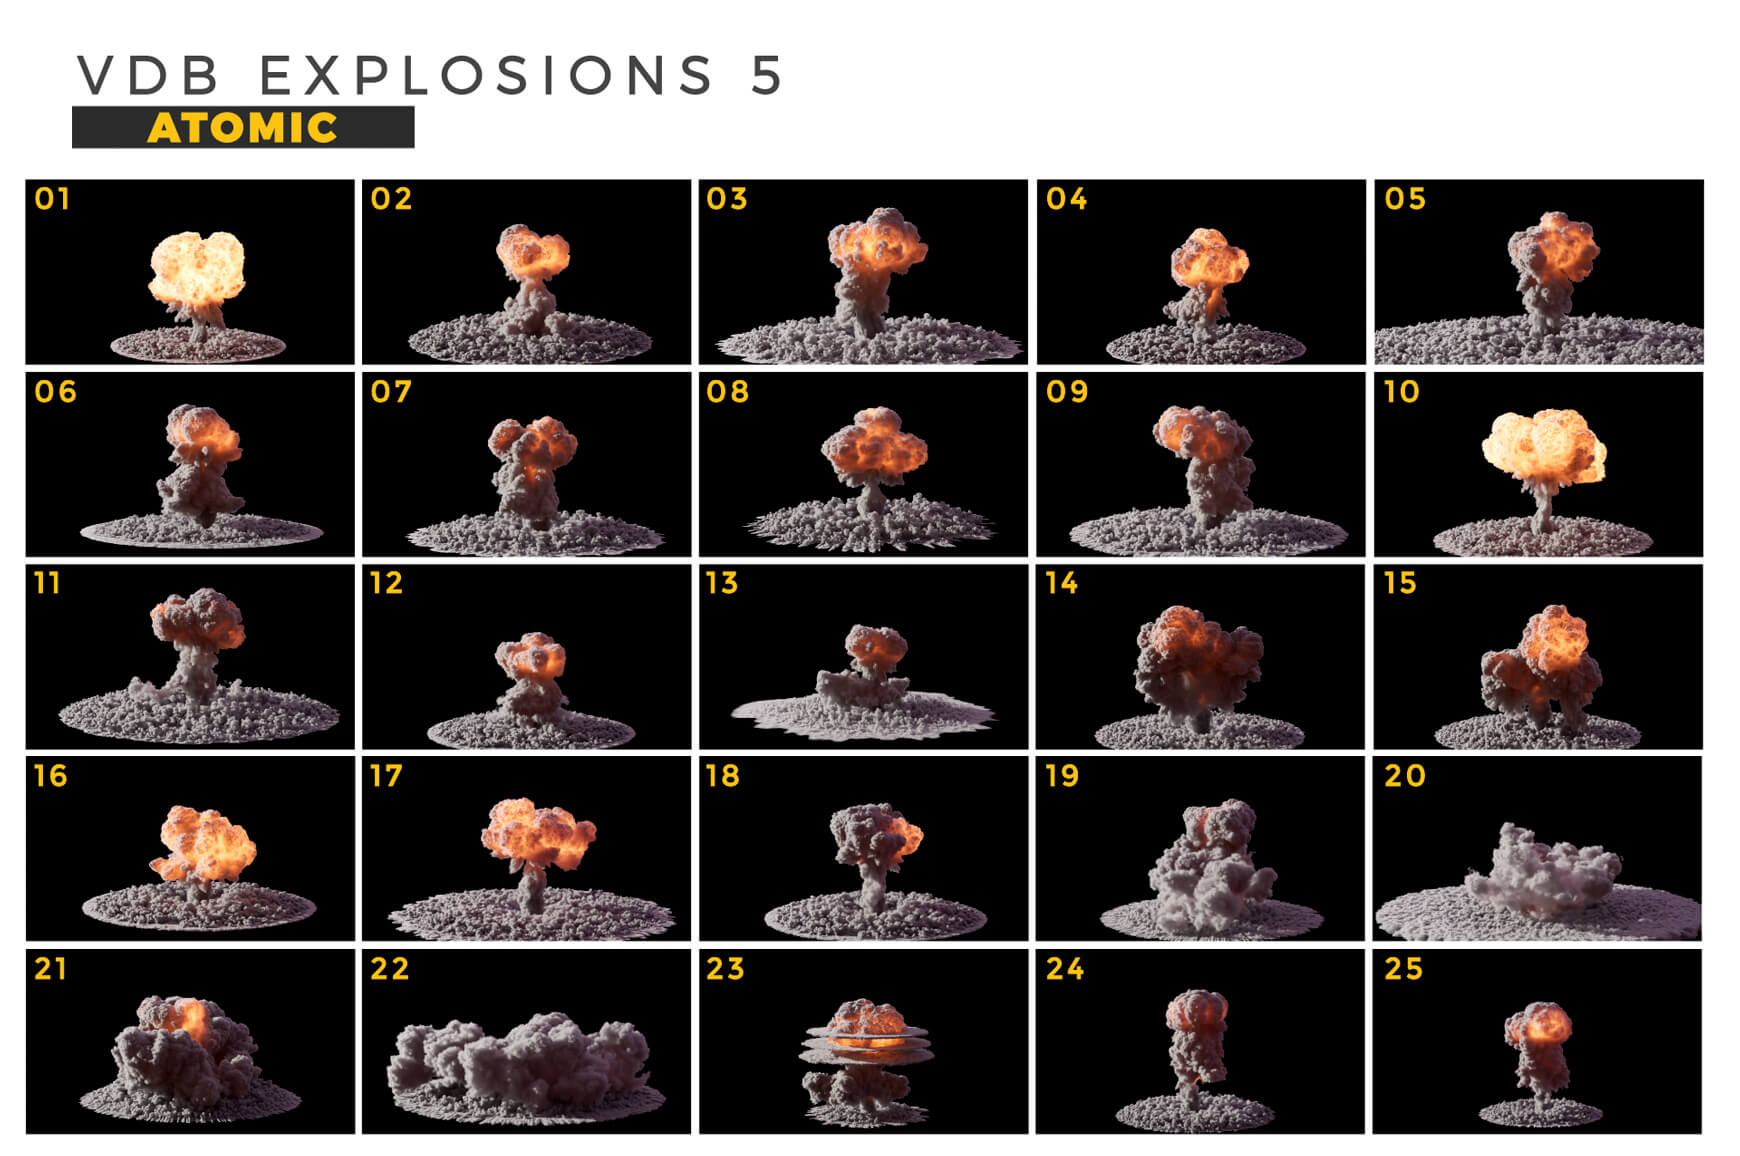 VDB Explosions 5 Atomic Quick Guide